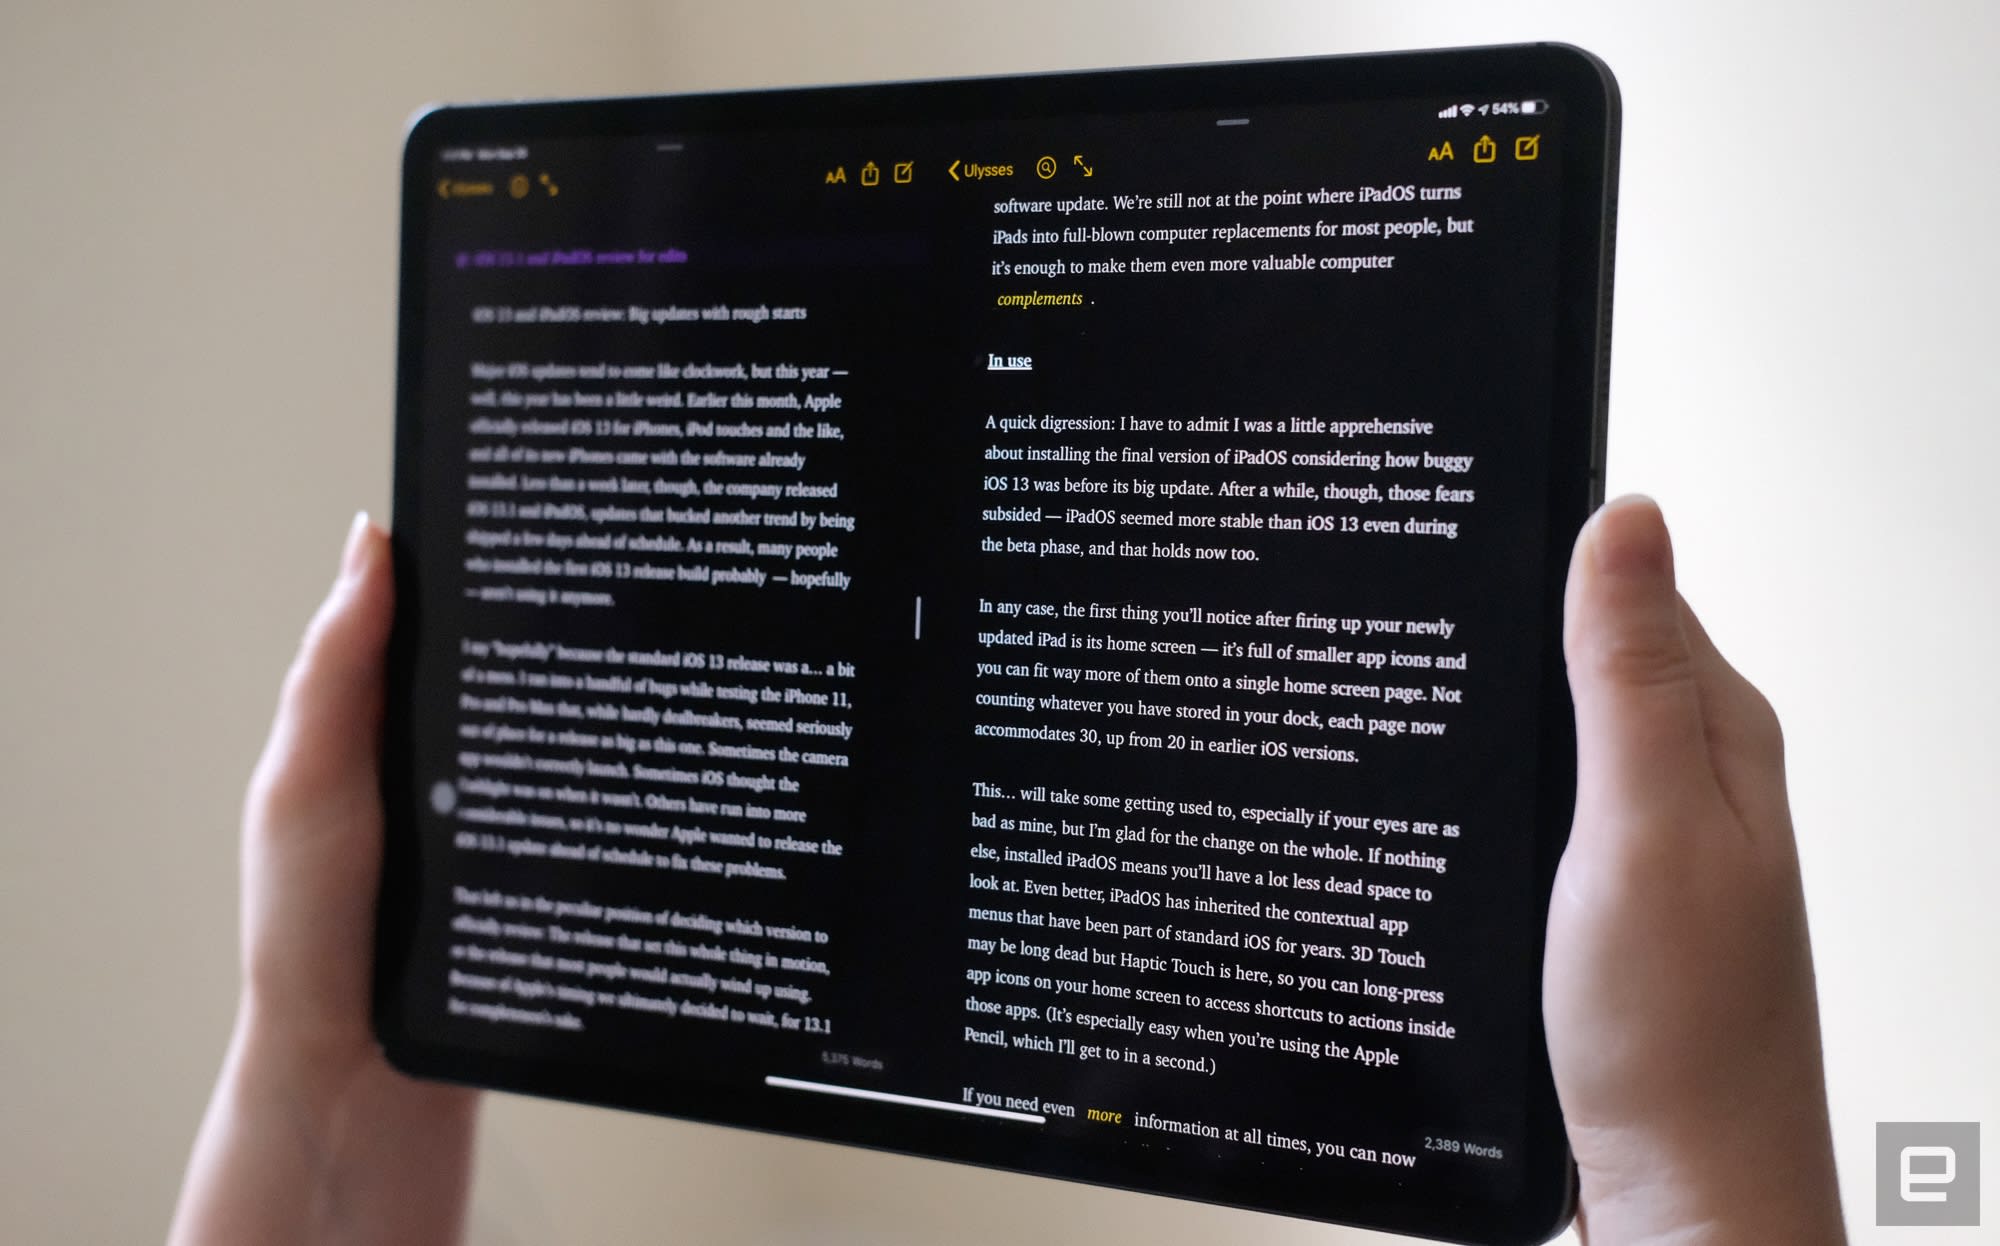 Google Docs, Slides and Sheets now feature drag-and-drop on iPad